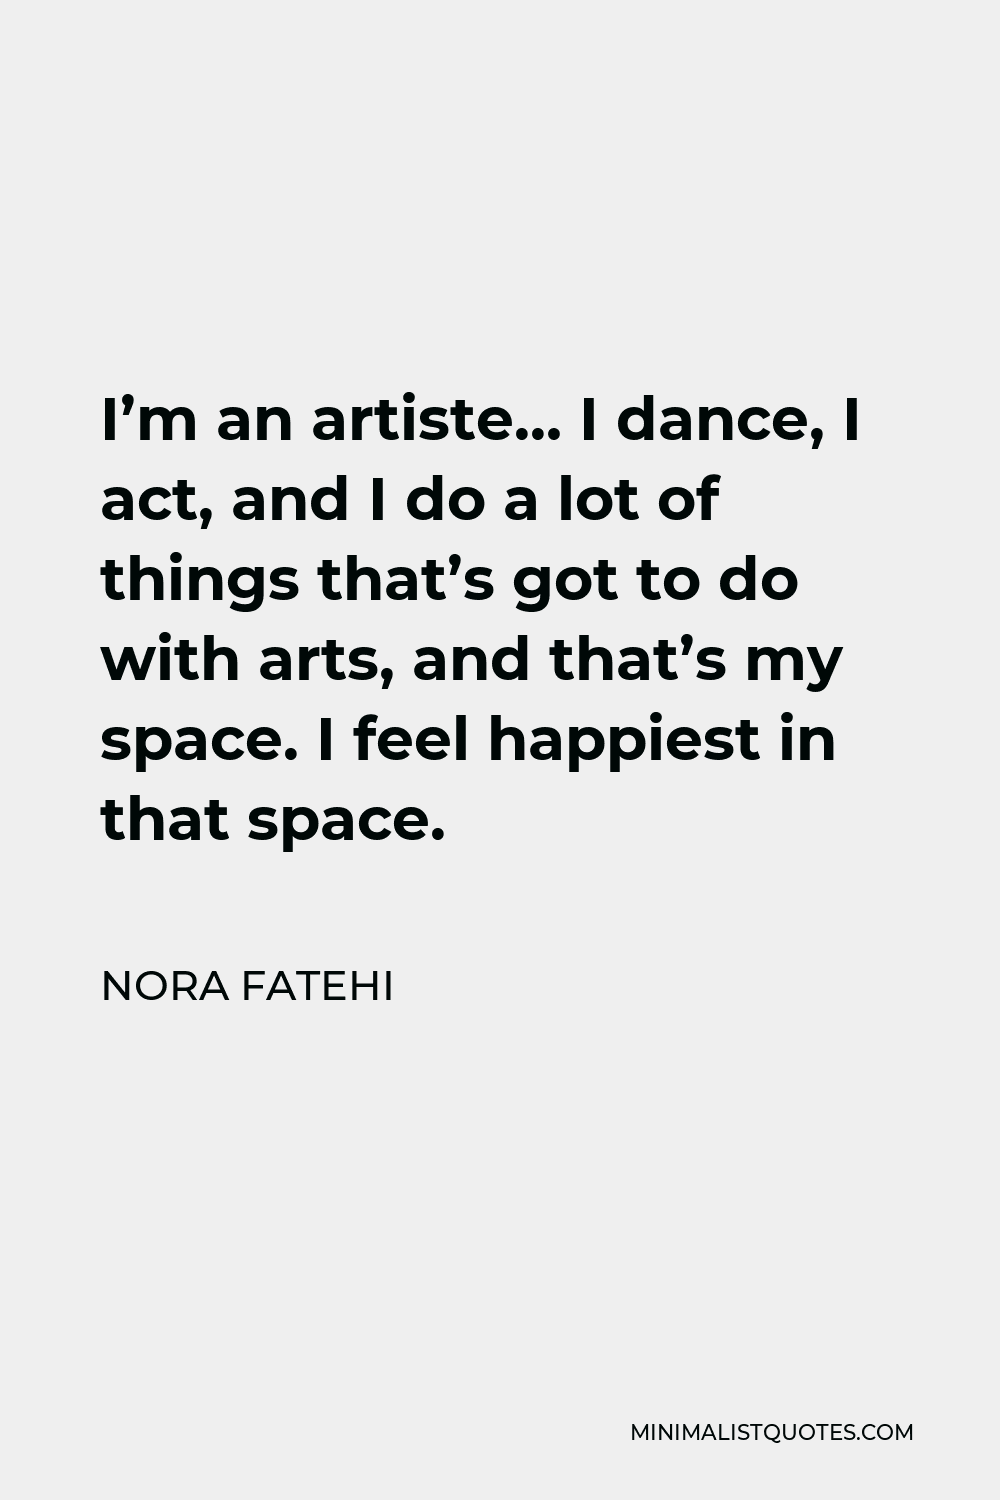 Nora Fatehi Quote - I’m an artiste… I dance, I act, and I do a lot of things that’s got to do with arts, and that’s my space. I feel happiest in that space.